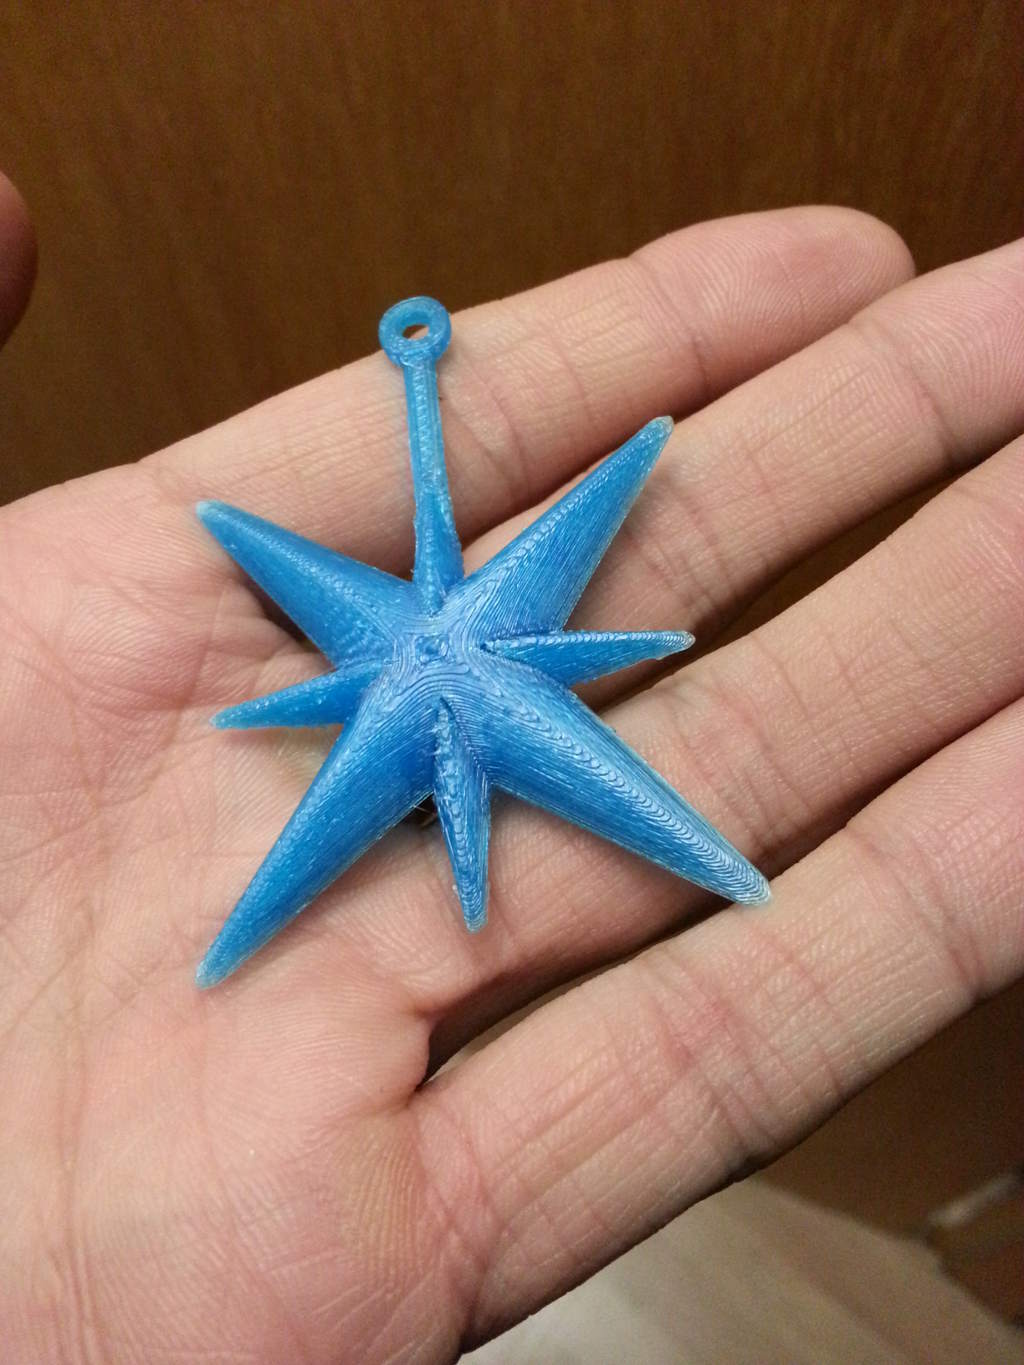 Xmas tree dekorations from the 3d printer: Blue stars to be put on the tree.